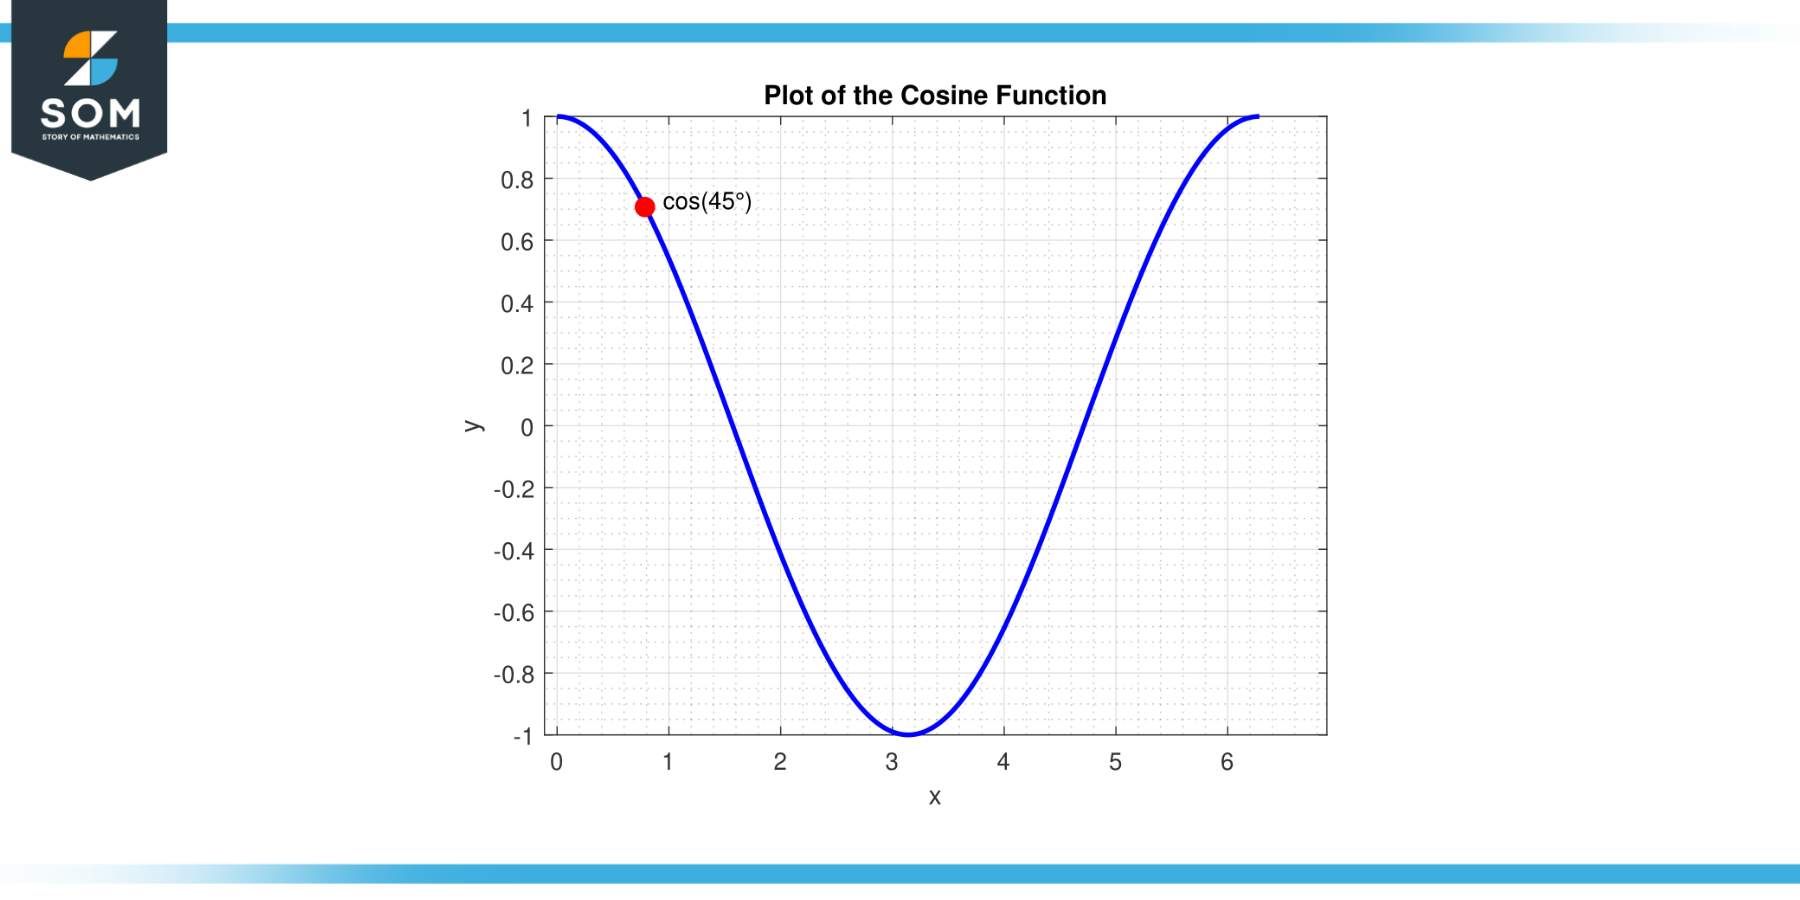 Cosine function with cos 45 degrees labled